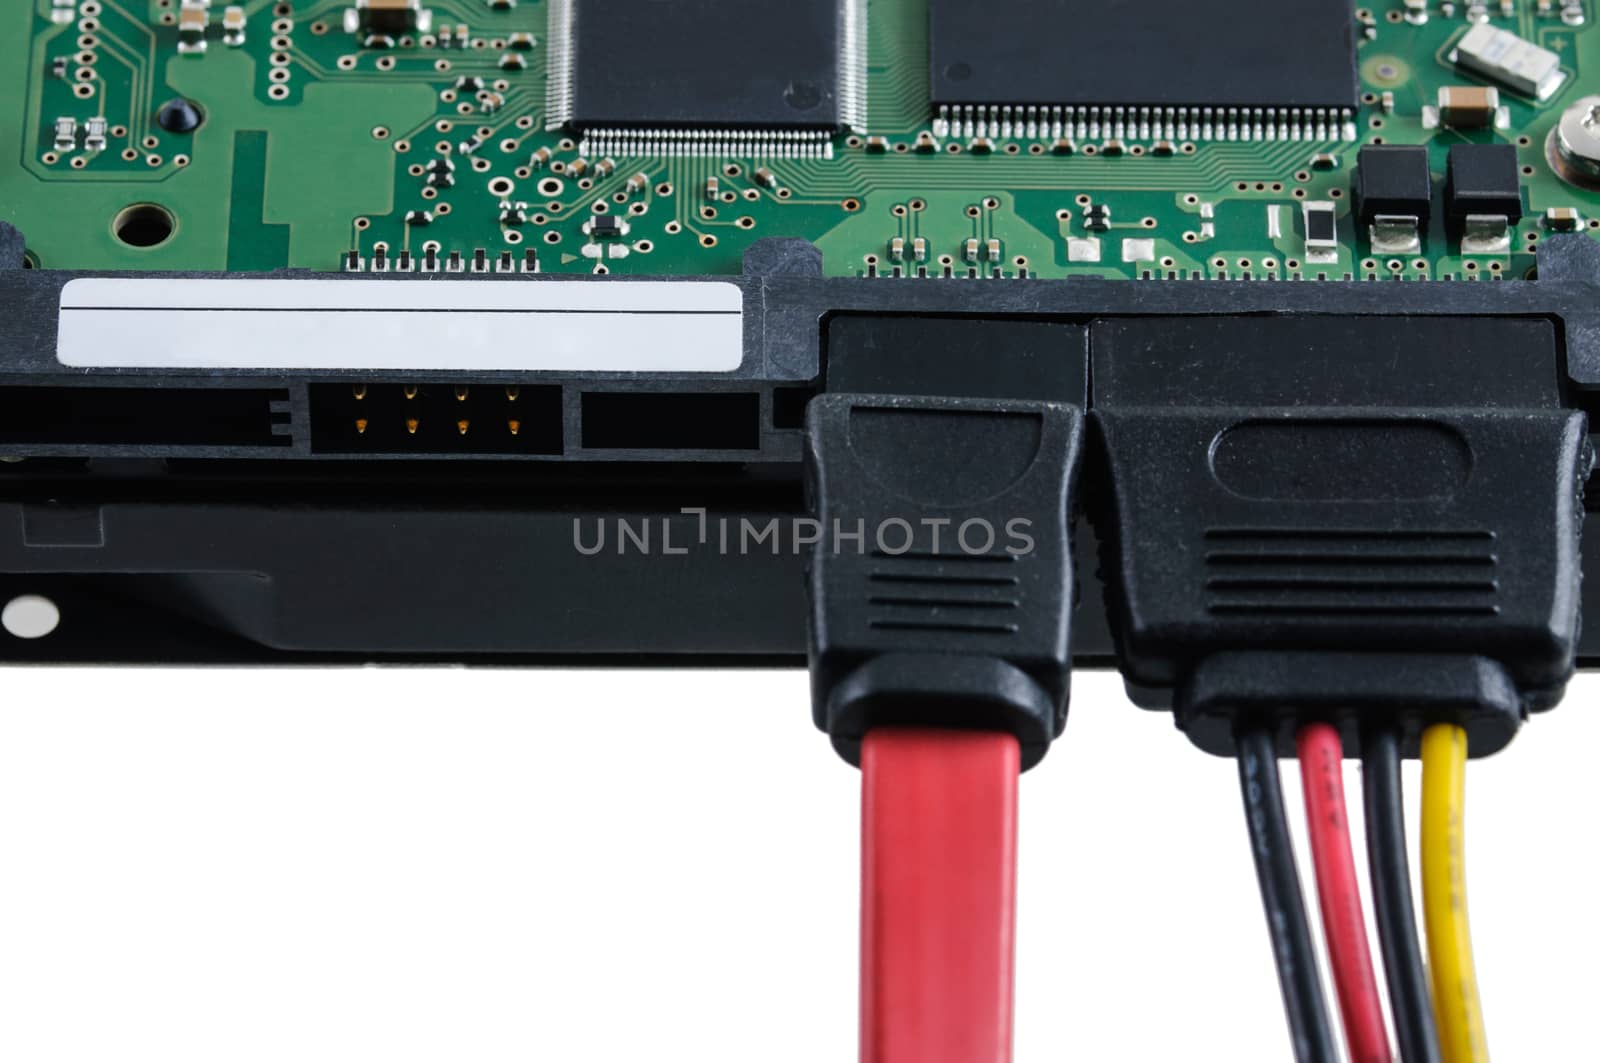 Cable connector to hard drive by NuwatPhoto